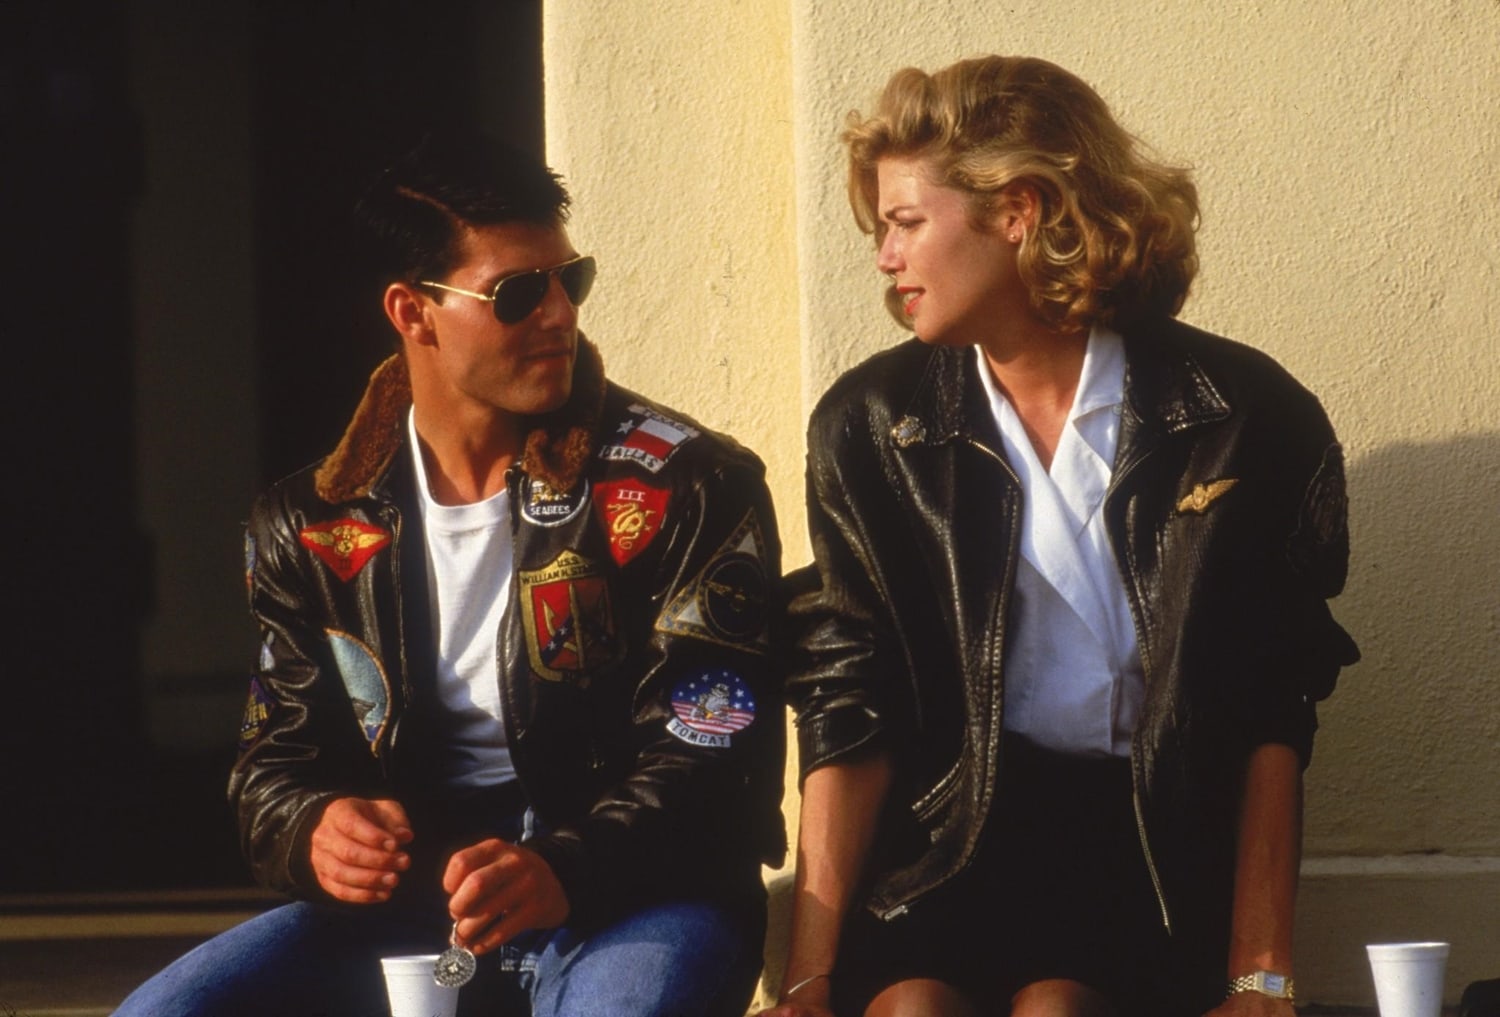 Kelly McGillis as Charlotte Charlie Blackwood and Tom Cruise as LT Pete "Maverick" Mitchell in the 1986 American action drama film Top Gun